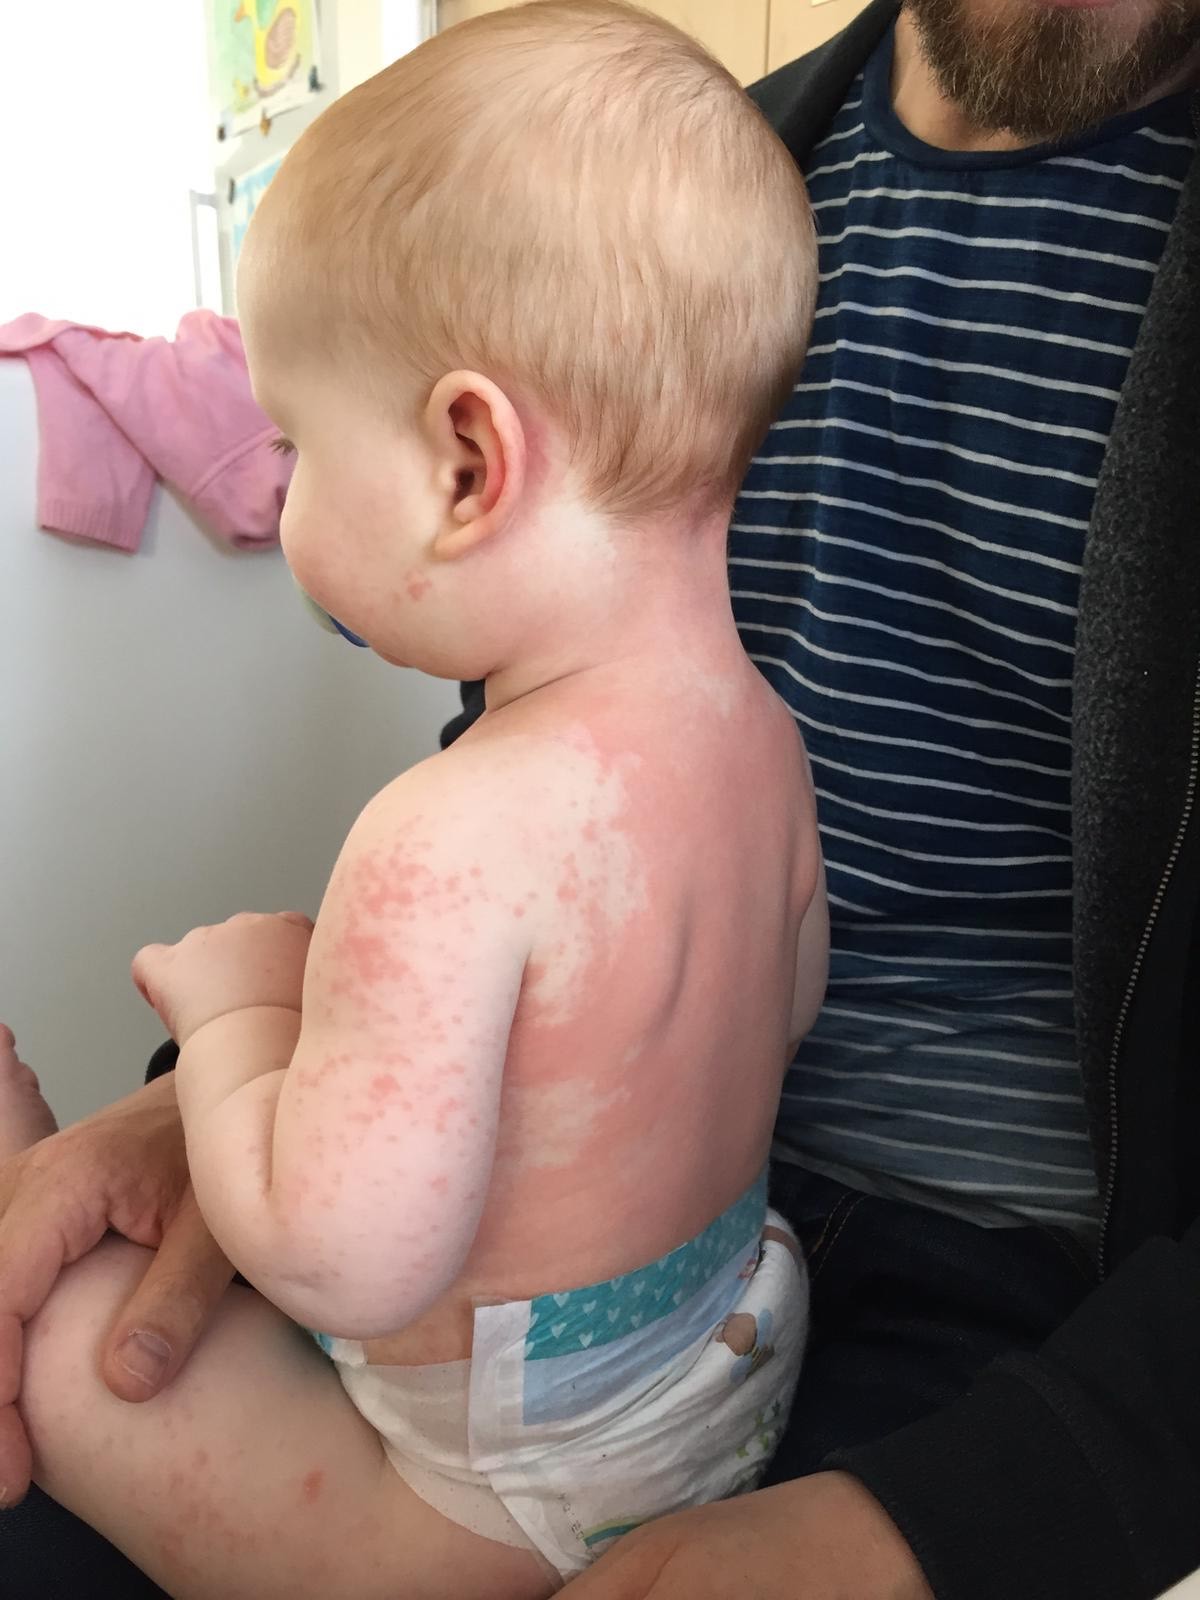 Alexander developed a rash across his back, which spread to the rest of his body (Family handout/PA Wire)